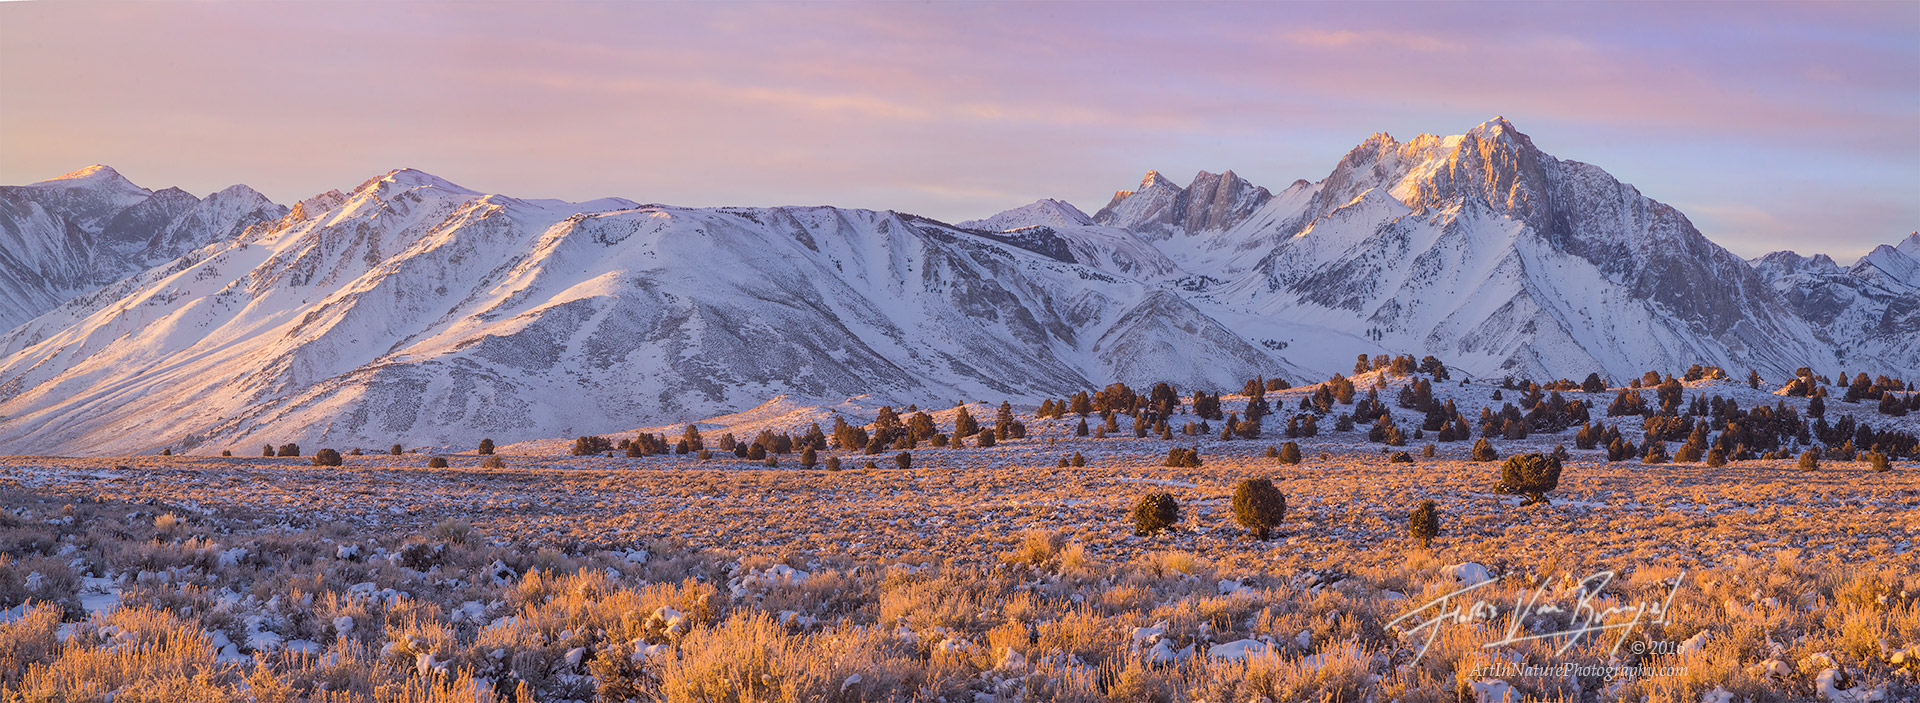 Morning sunshine brings warmth to this panorama of frigid juniper studded high desert east of the Sierra Nevada. The prominent...